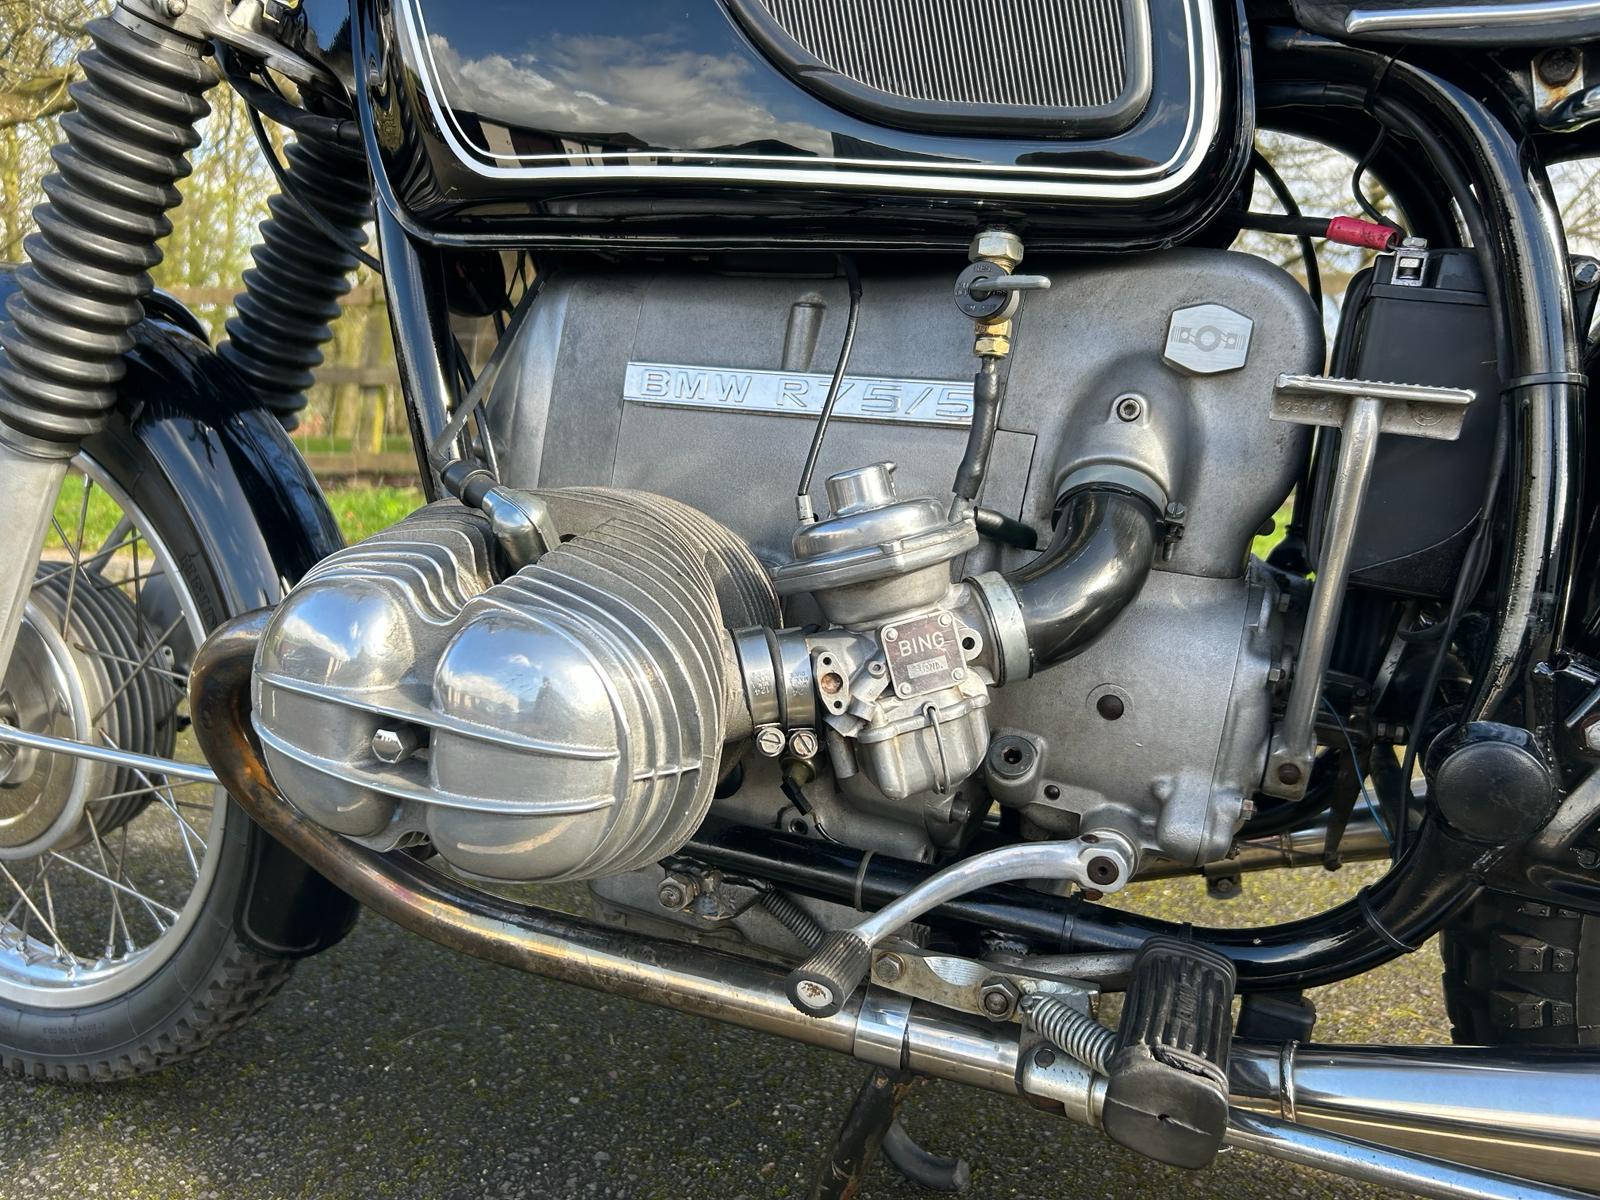 A BMW R75/5 MOTORCYCLE .1971. 72452 MILES. EXCELLENT WELL RESTORED CONDITION, V5, MOT AND TAX - Image 8 of 17